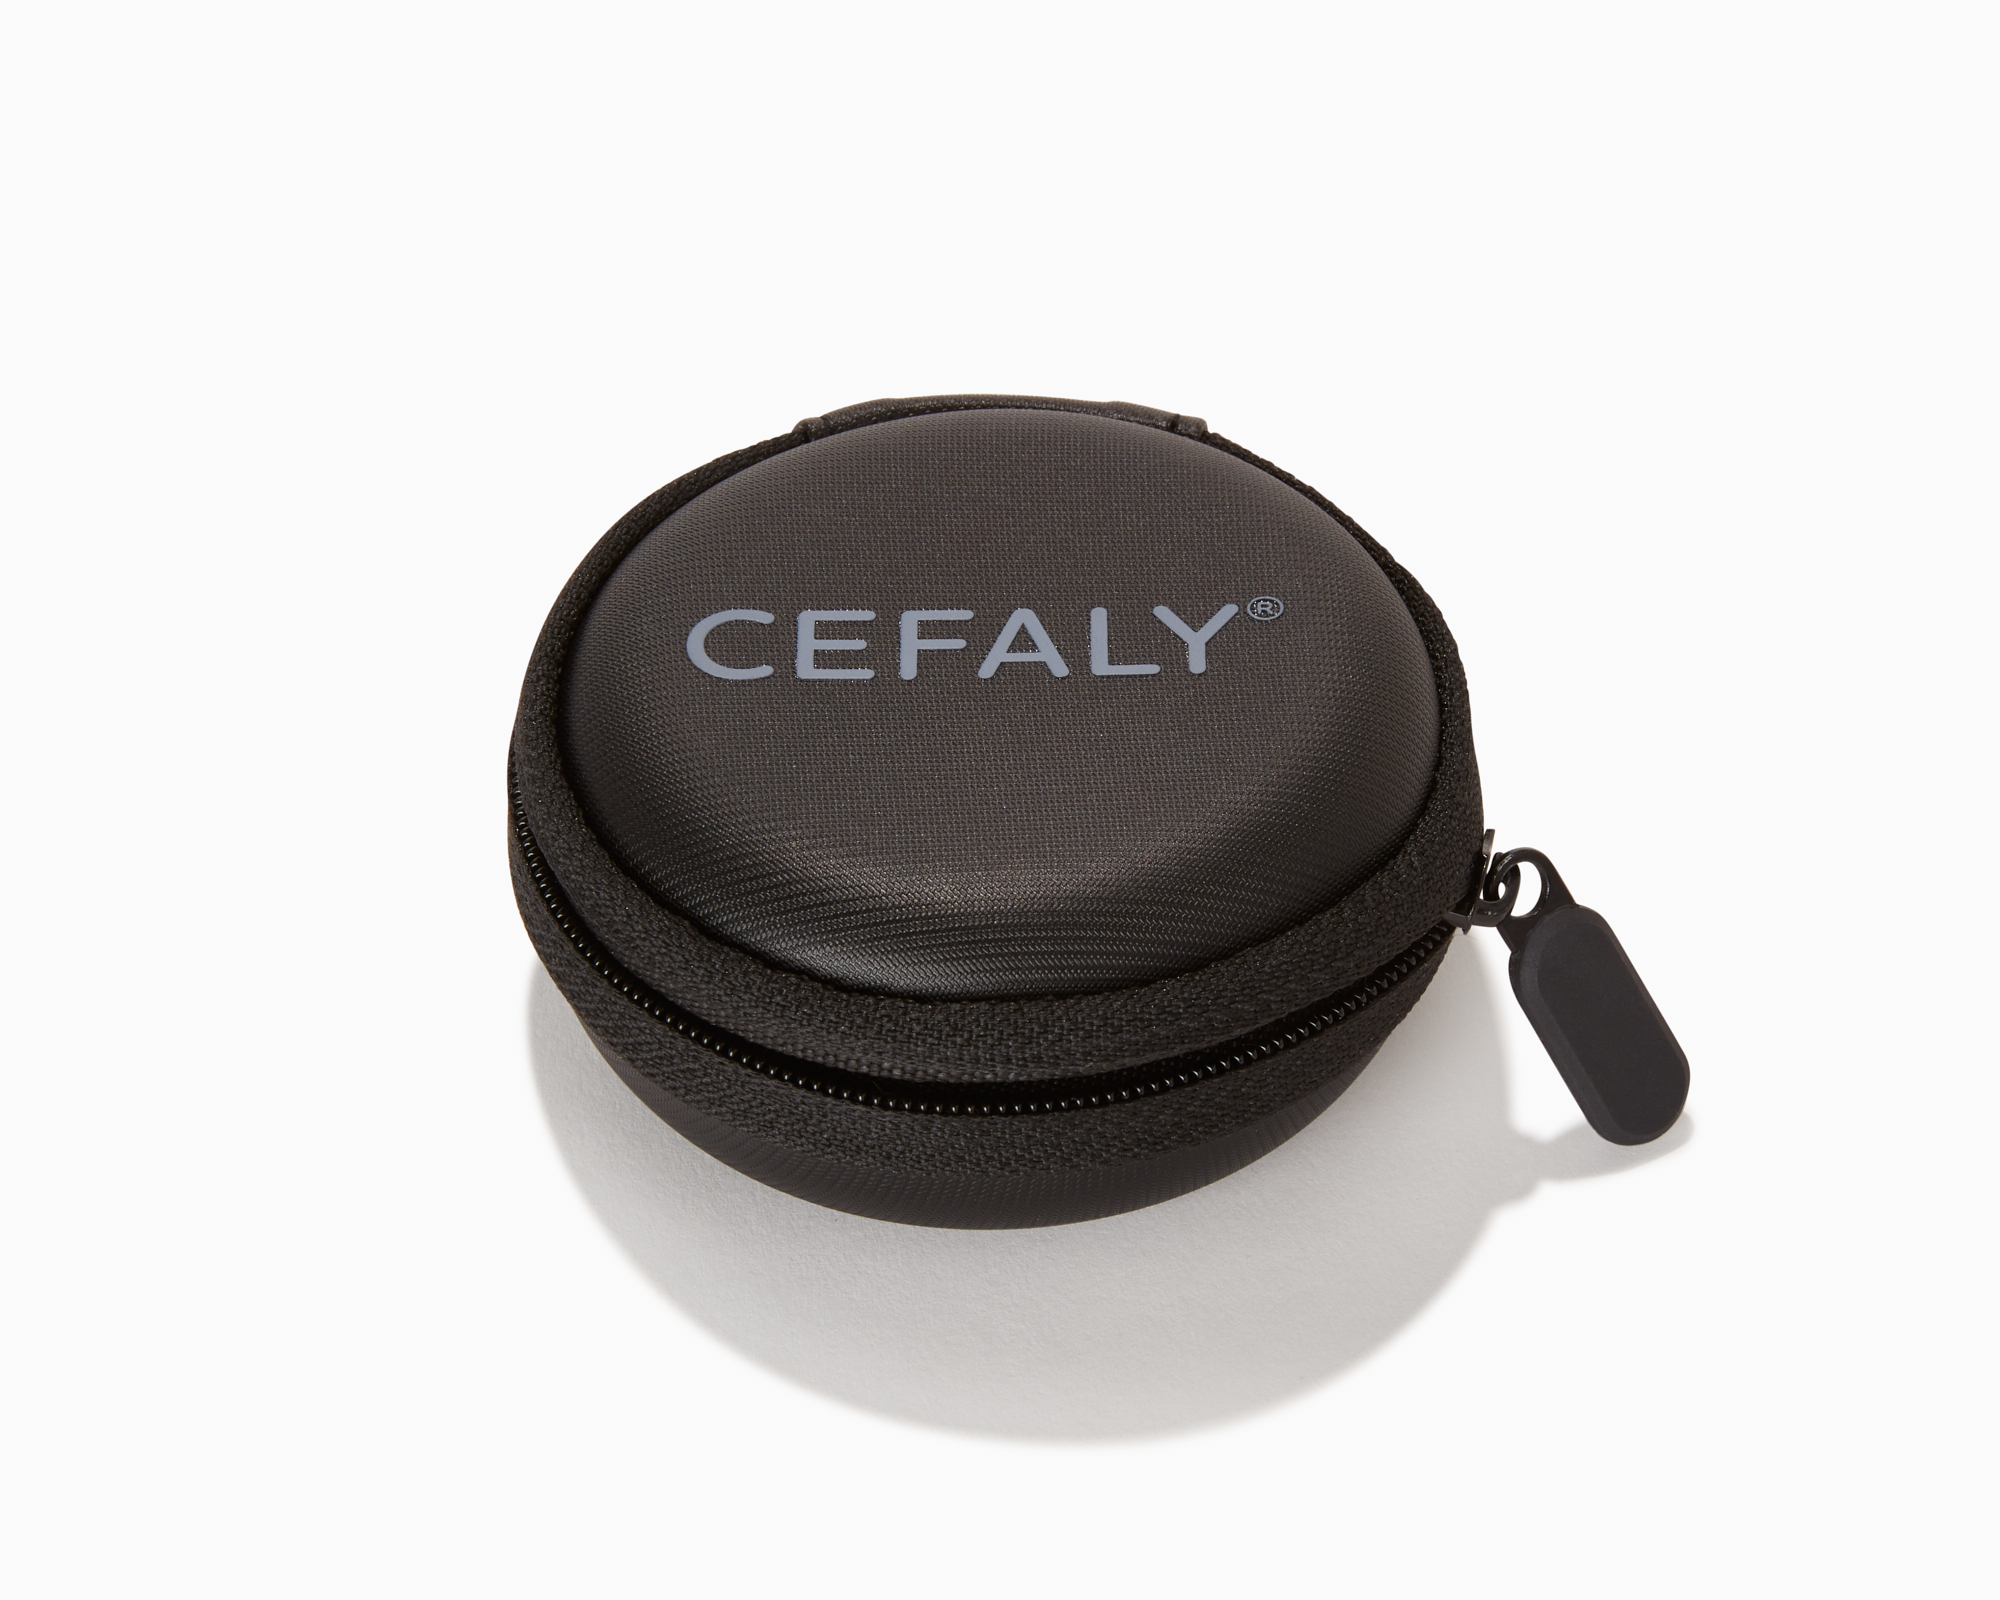 Cefaly Travel Case